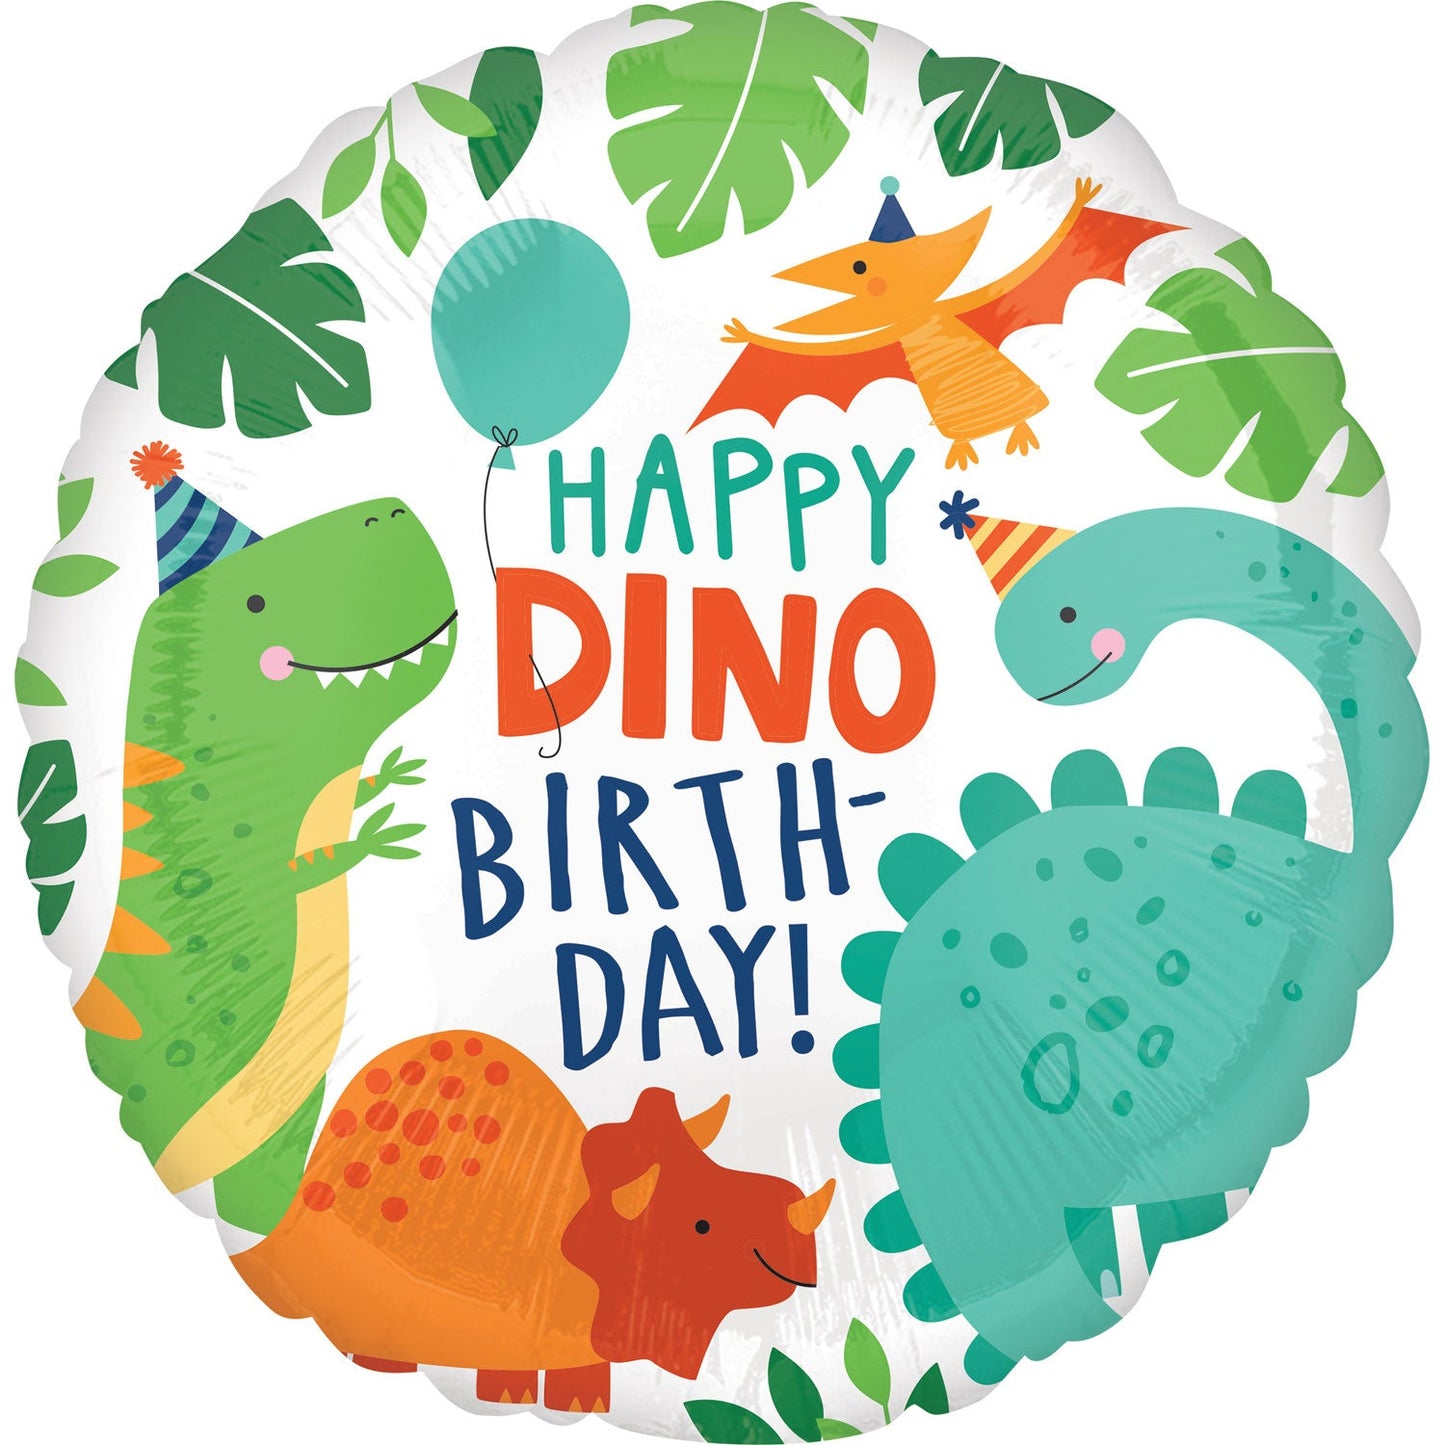 Dino-Mite Party Birthday Standard Foil Balloon. 45cm. Can be inflated with air or helium. Balloon is sold uninflated.